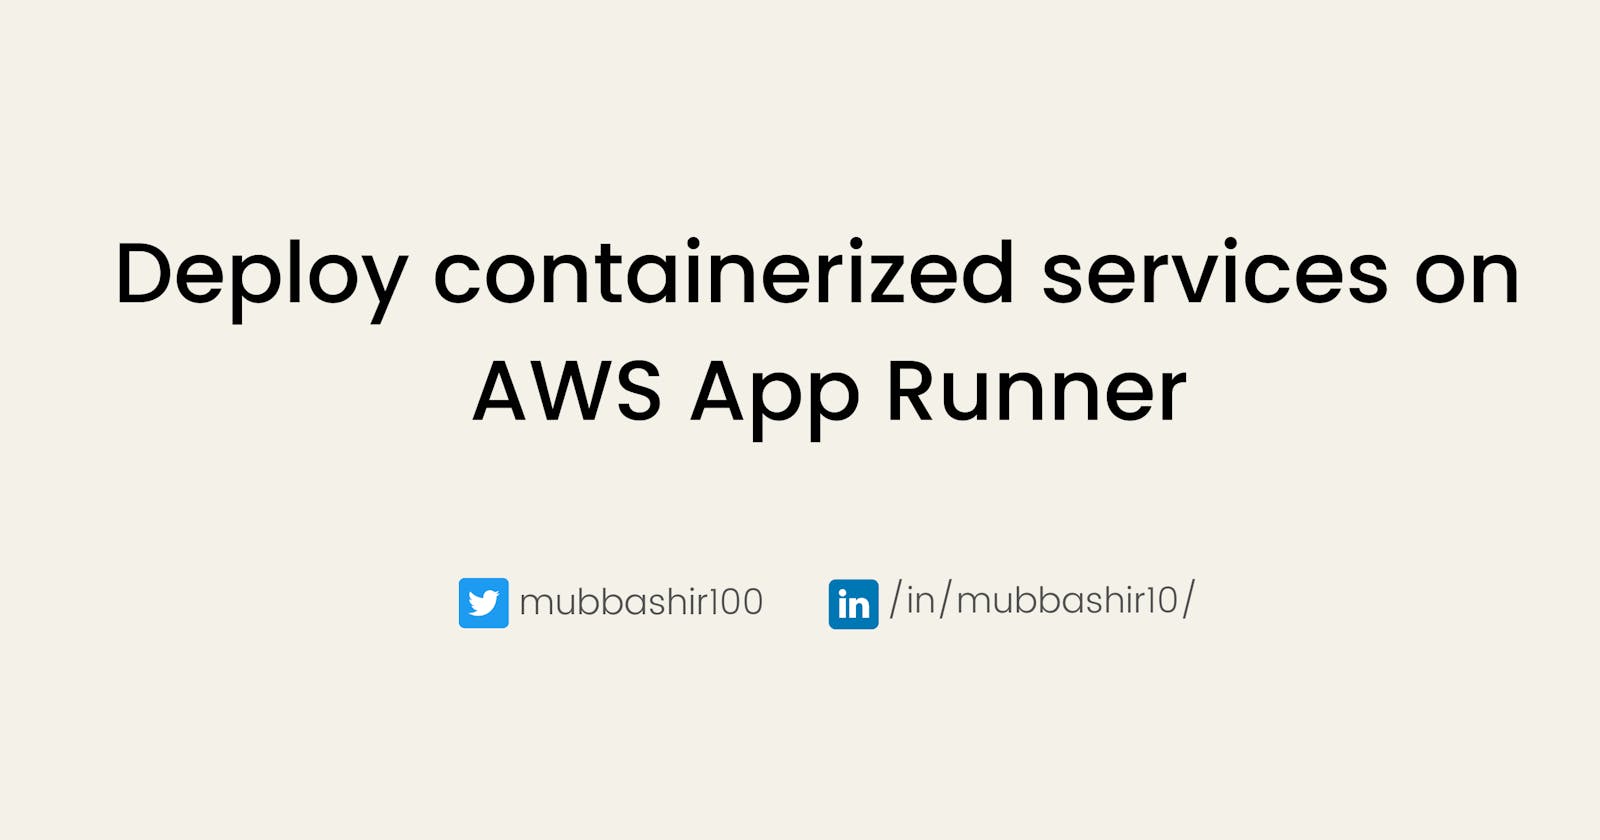 Deploy containerized services on AWS App Runner